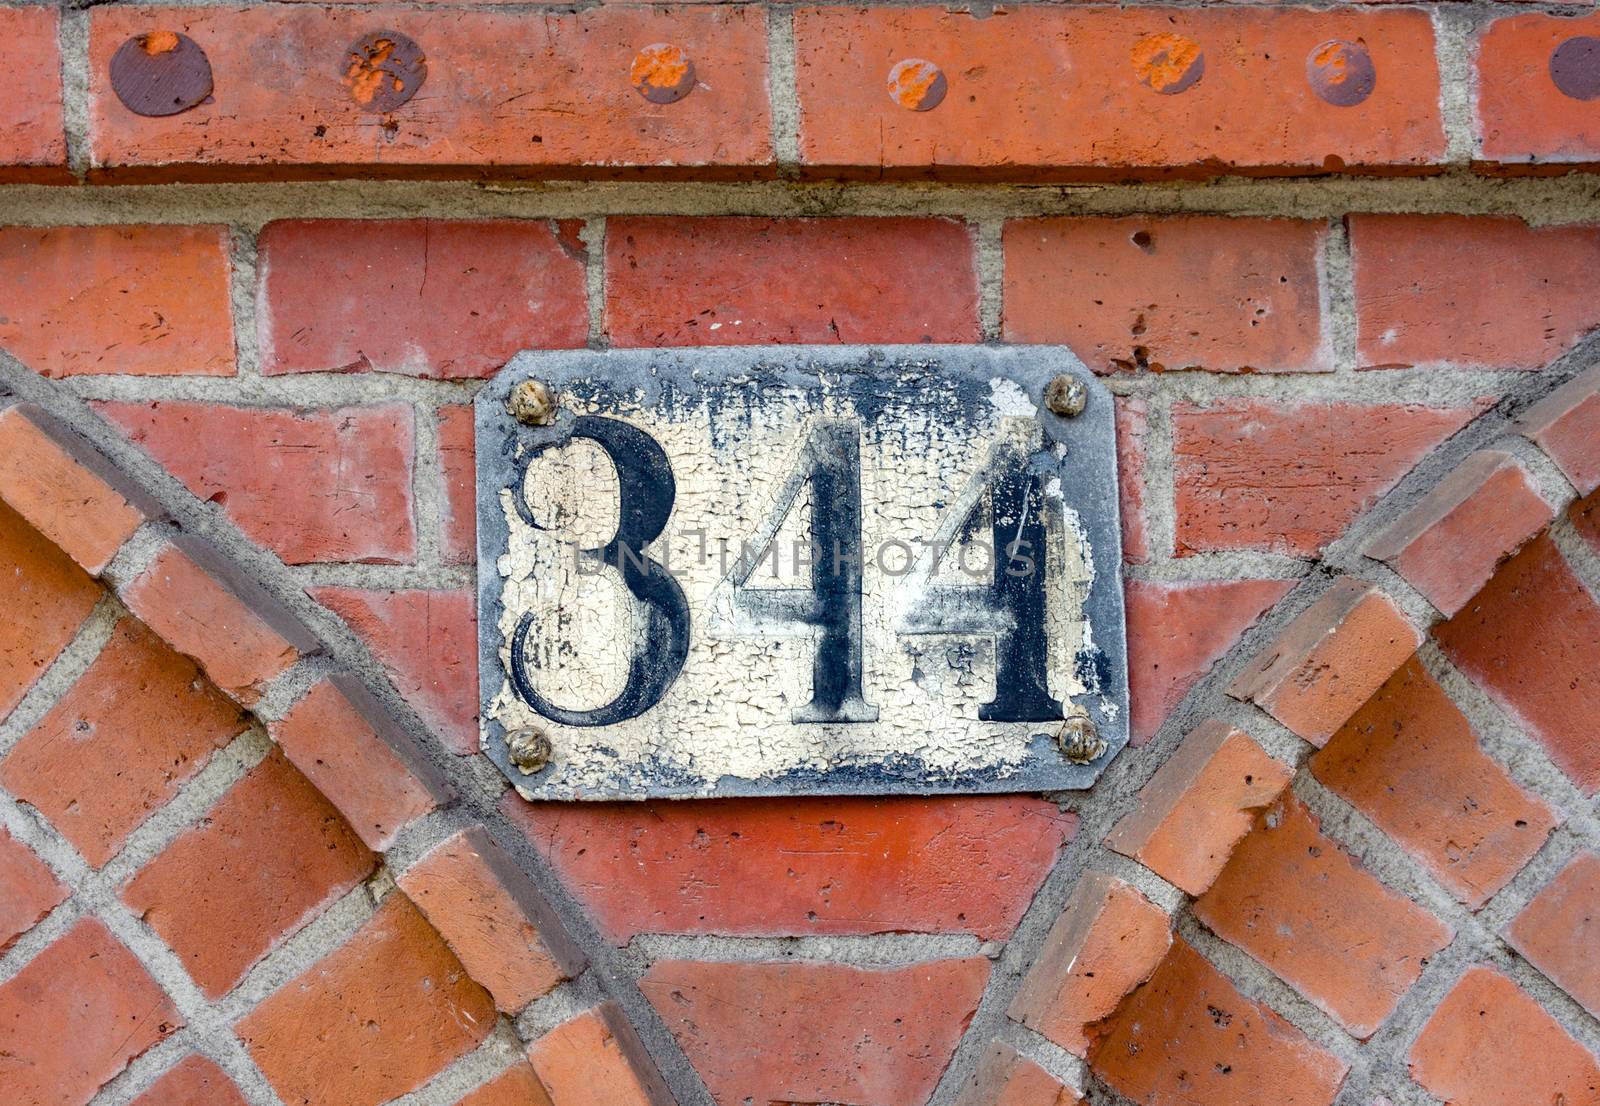 House number thee hundred and forty four (344)